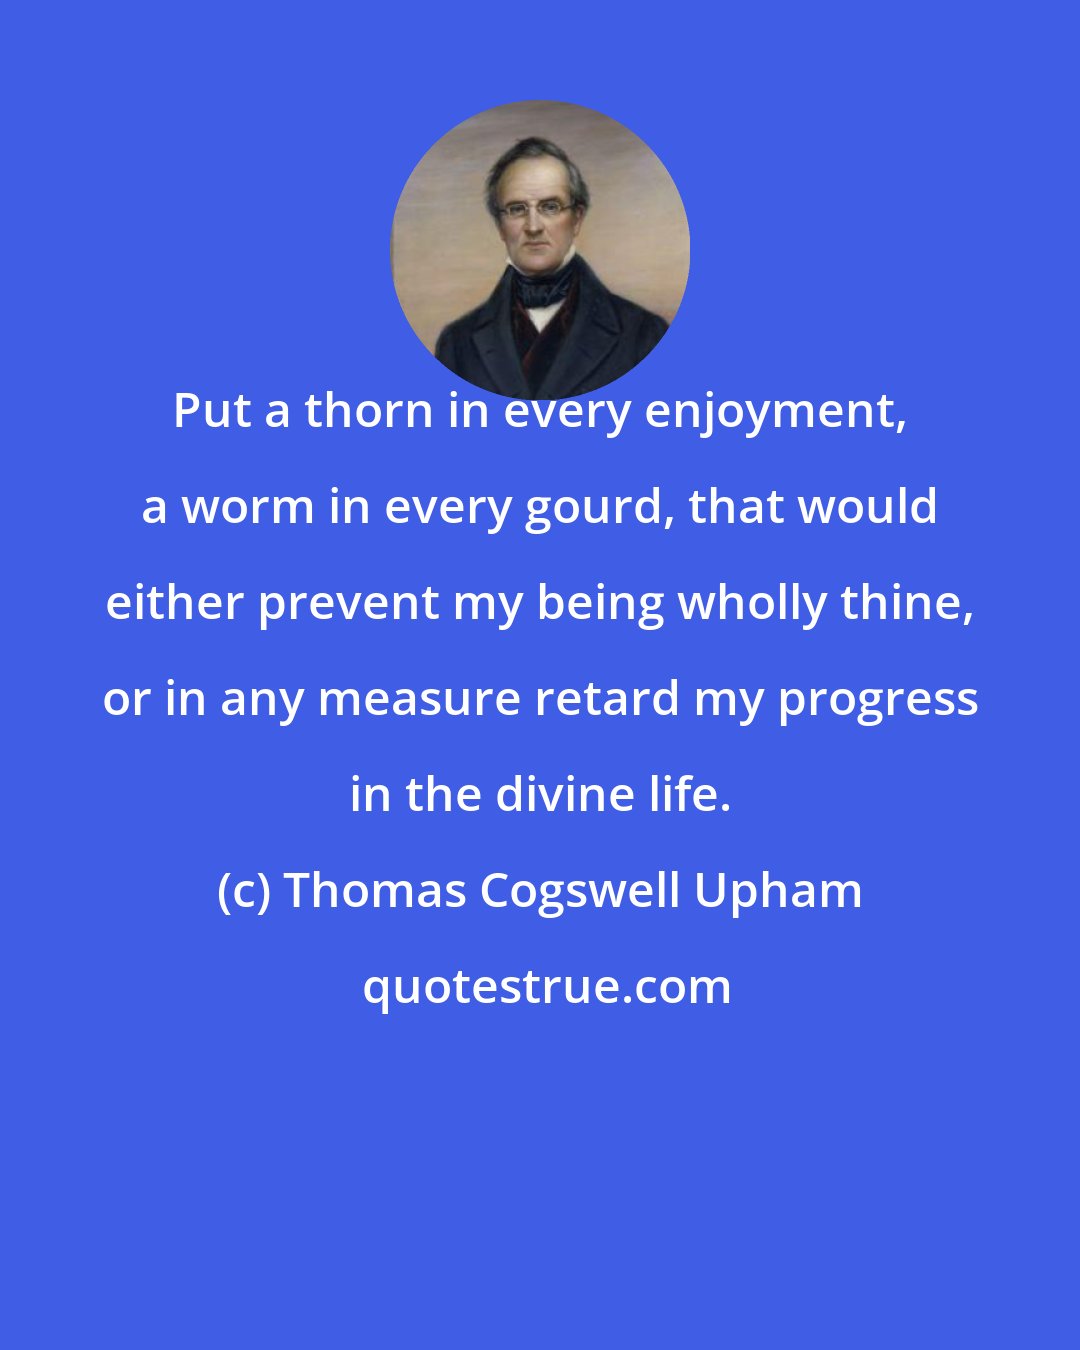 Thomas Cogswell Upham: Put a thorn in every enjoyment, a worm in every gourd, that would either prevent my being wholly thine, or in any measure retard my progress in the divine life.